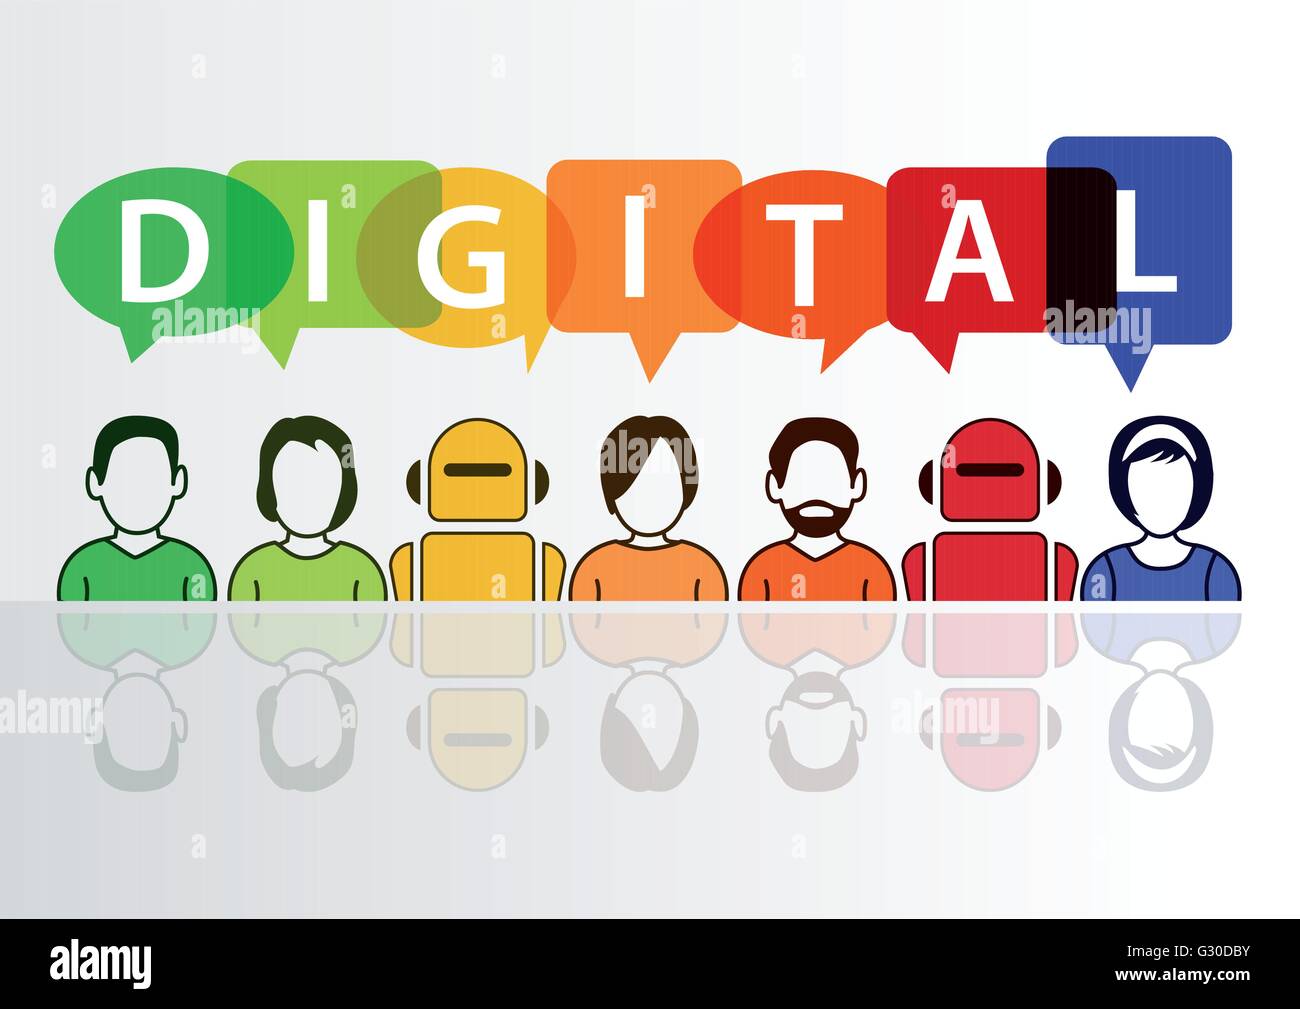 Digital and digitization conceptual background. Vector illustration of colorful group of people and robots Stock Vector